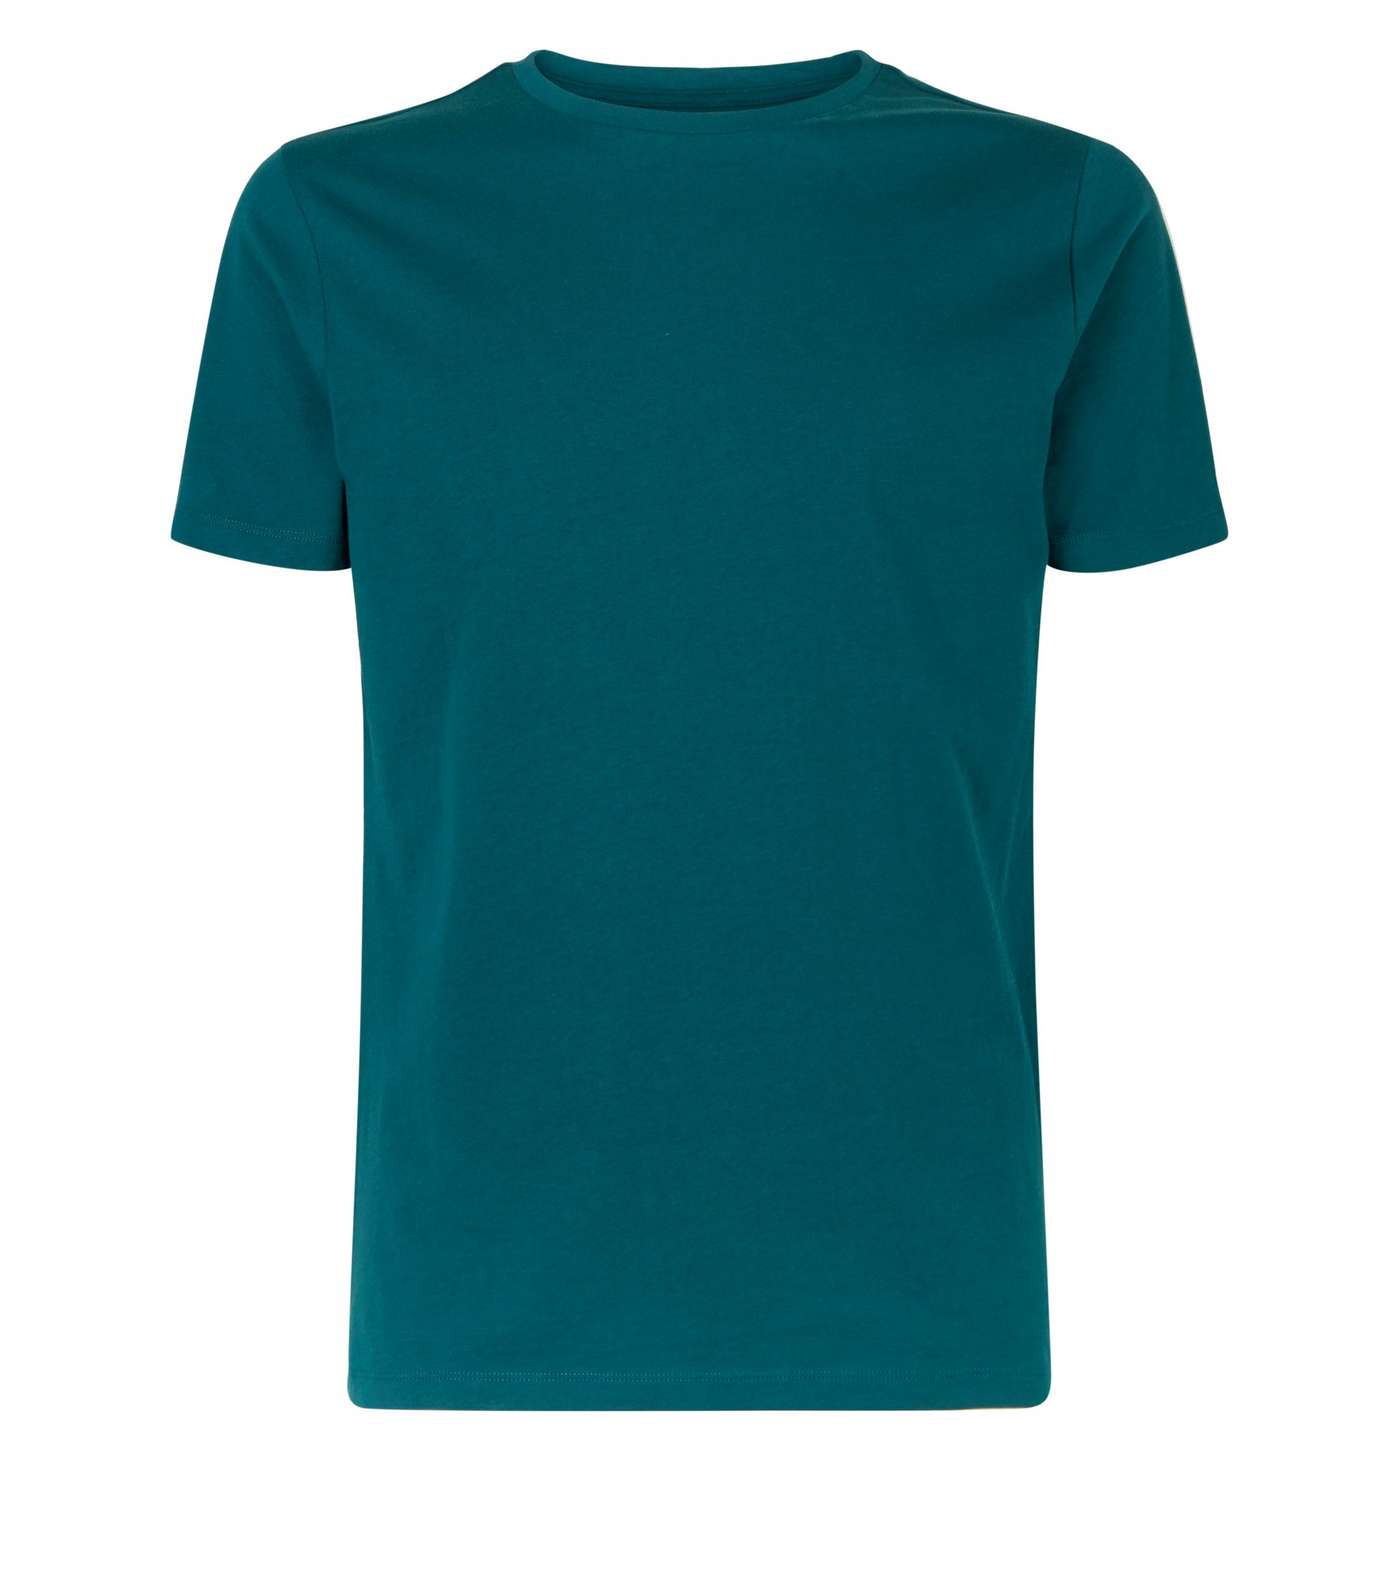 Teal Muscle Fit T-Shirt Image 4